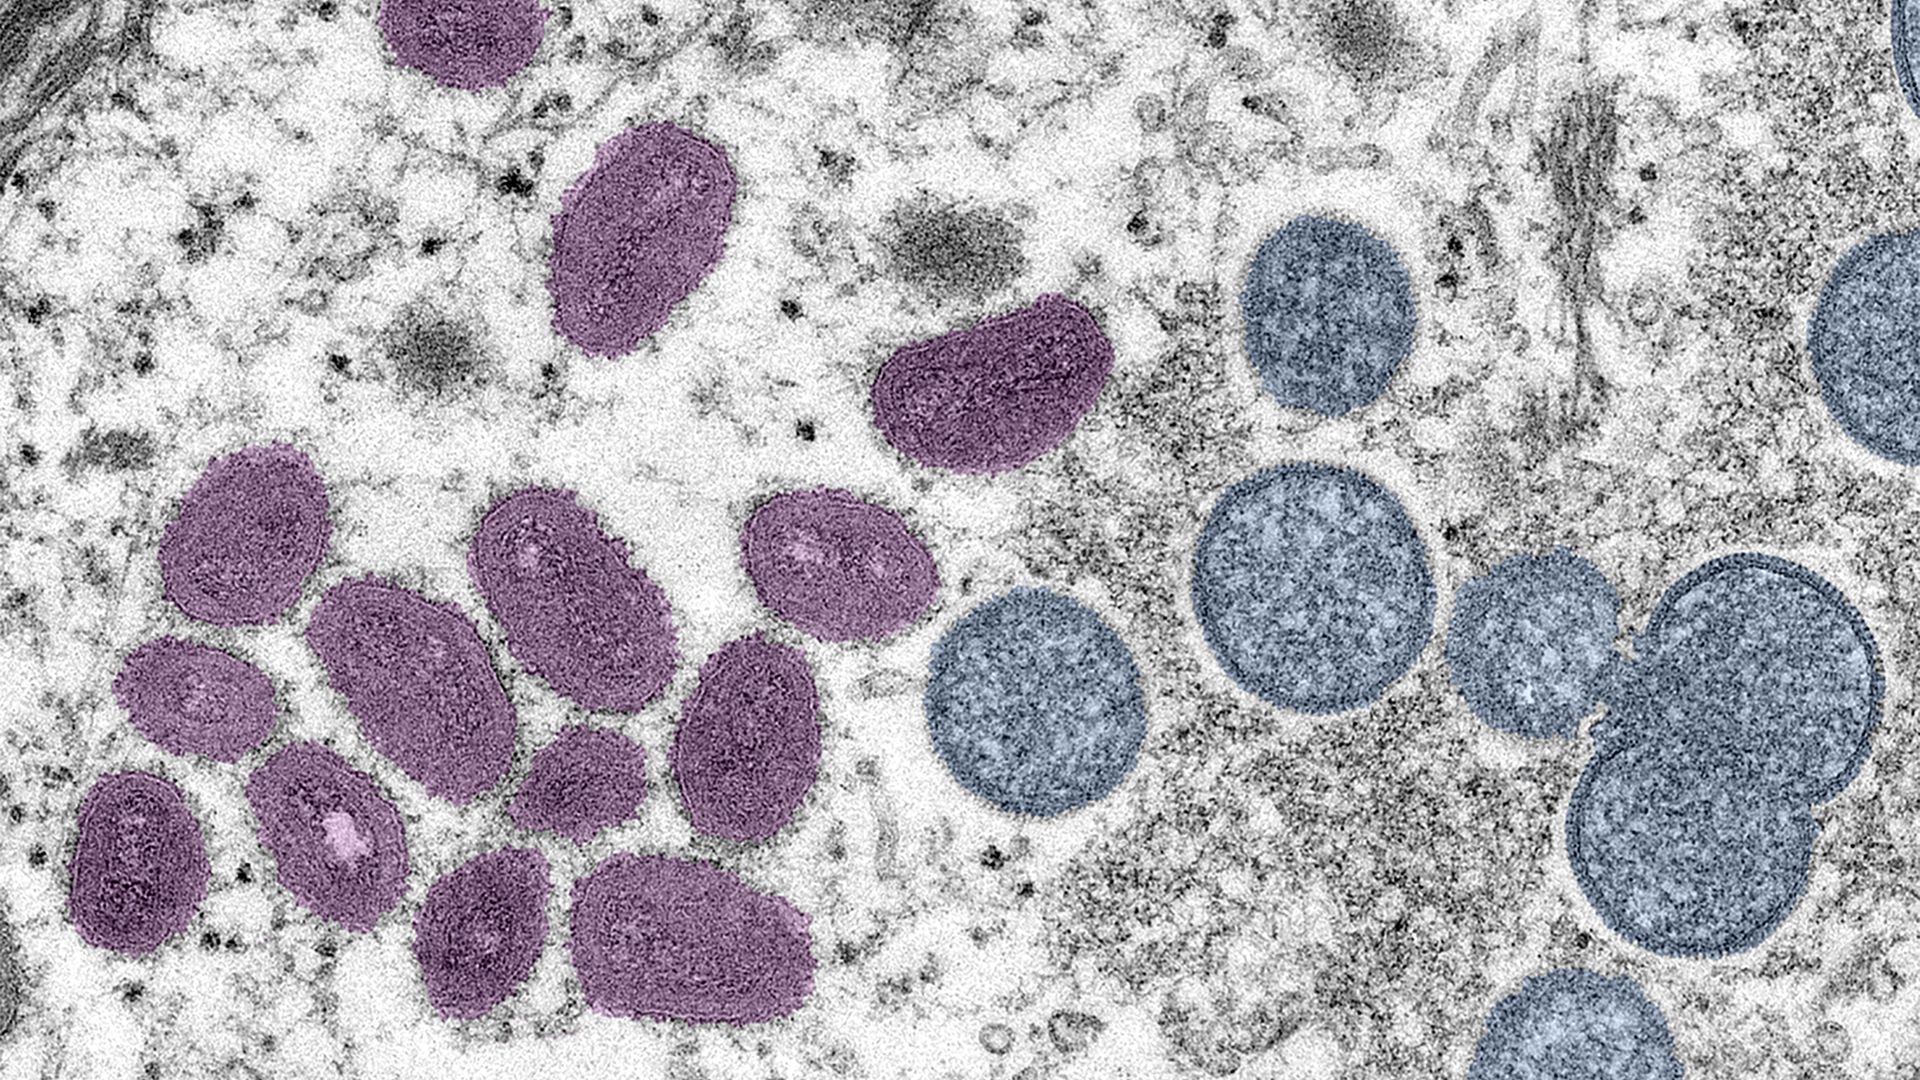 A microscopic image depicting a monkeypox virus particle published on June 6.